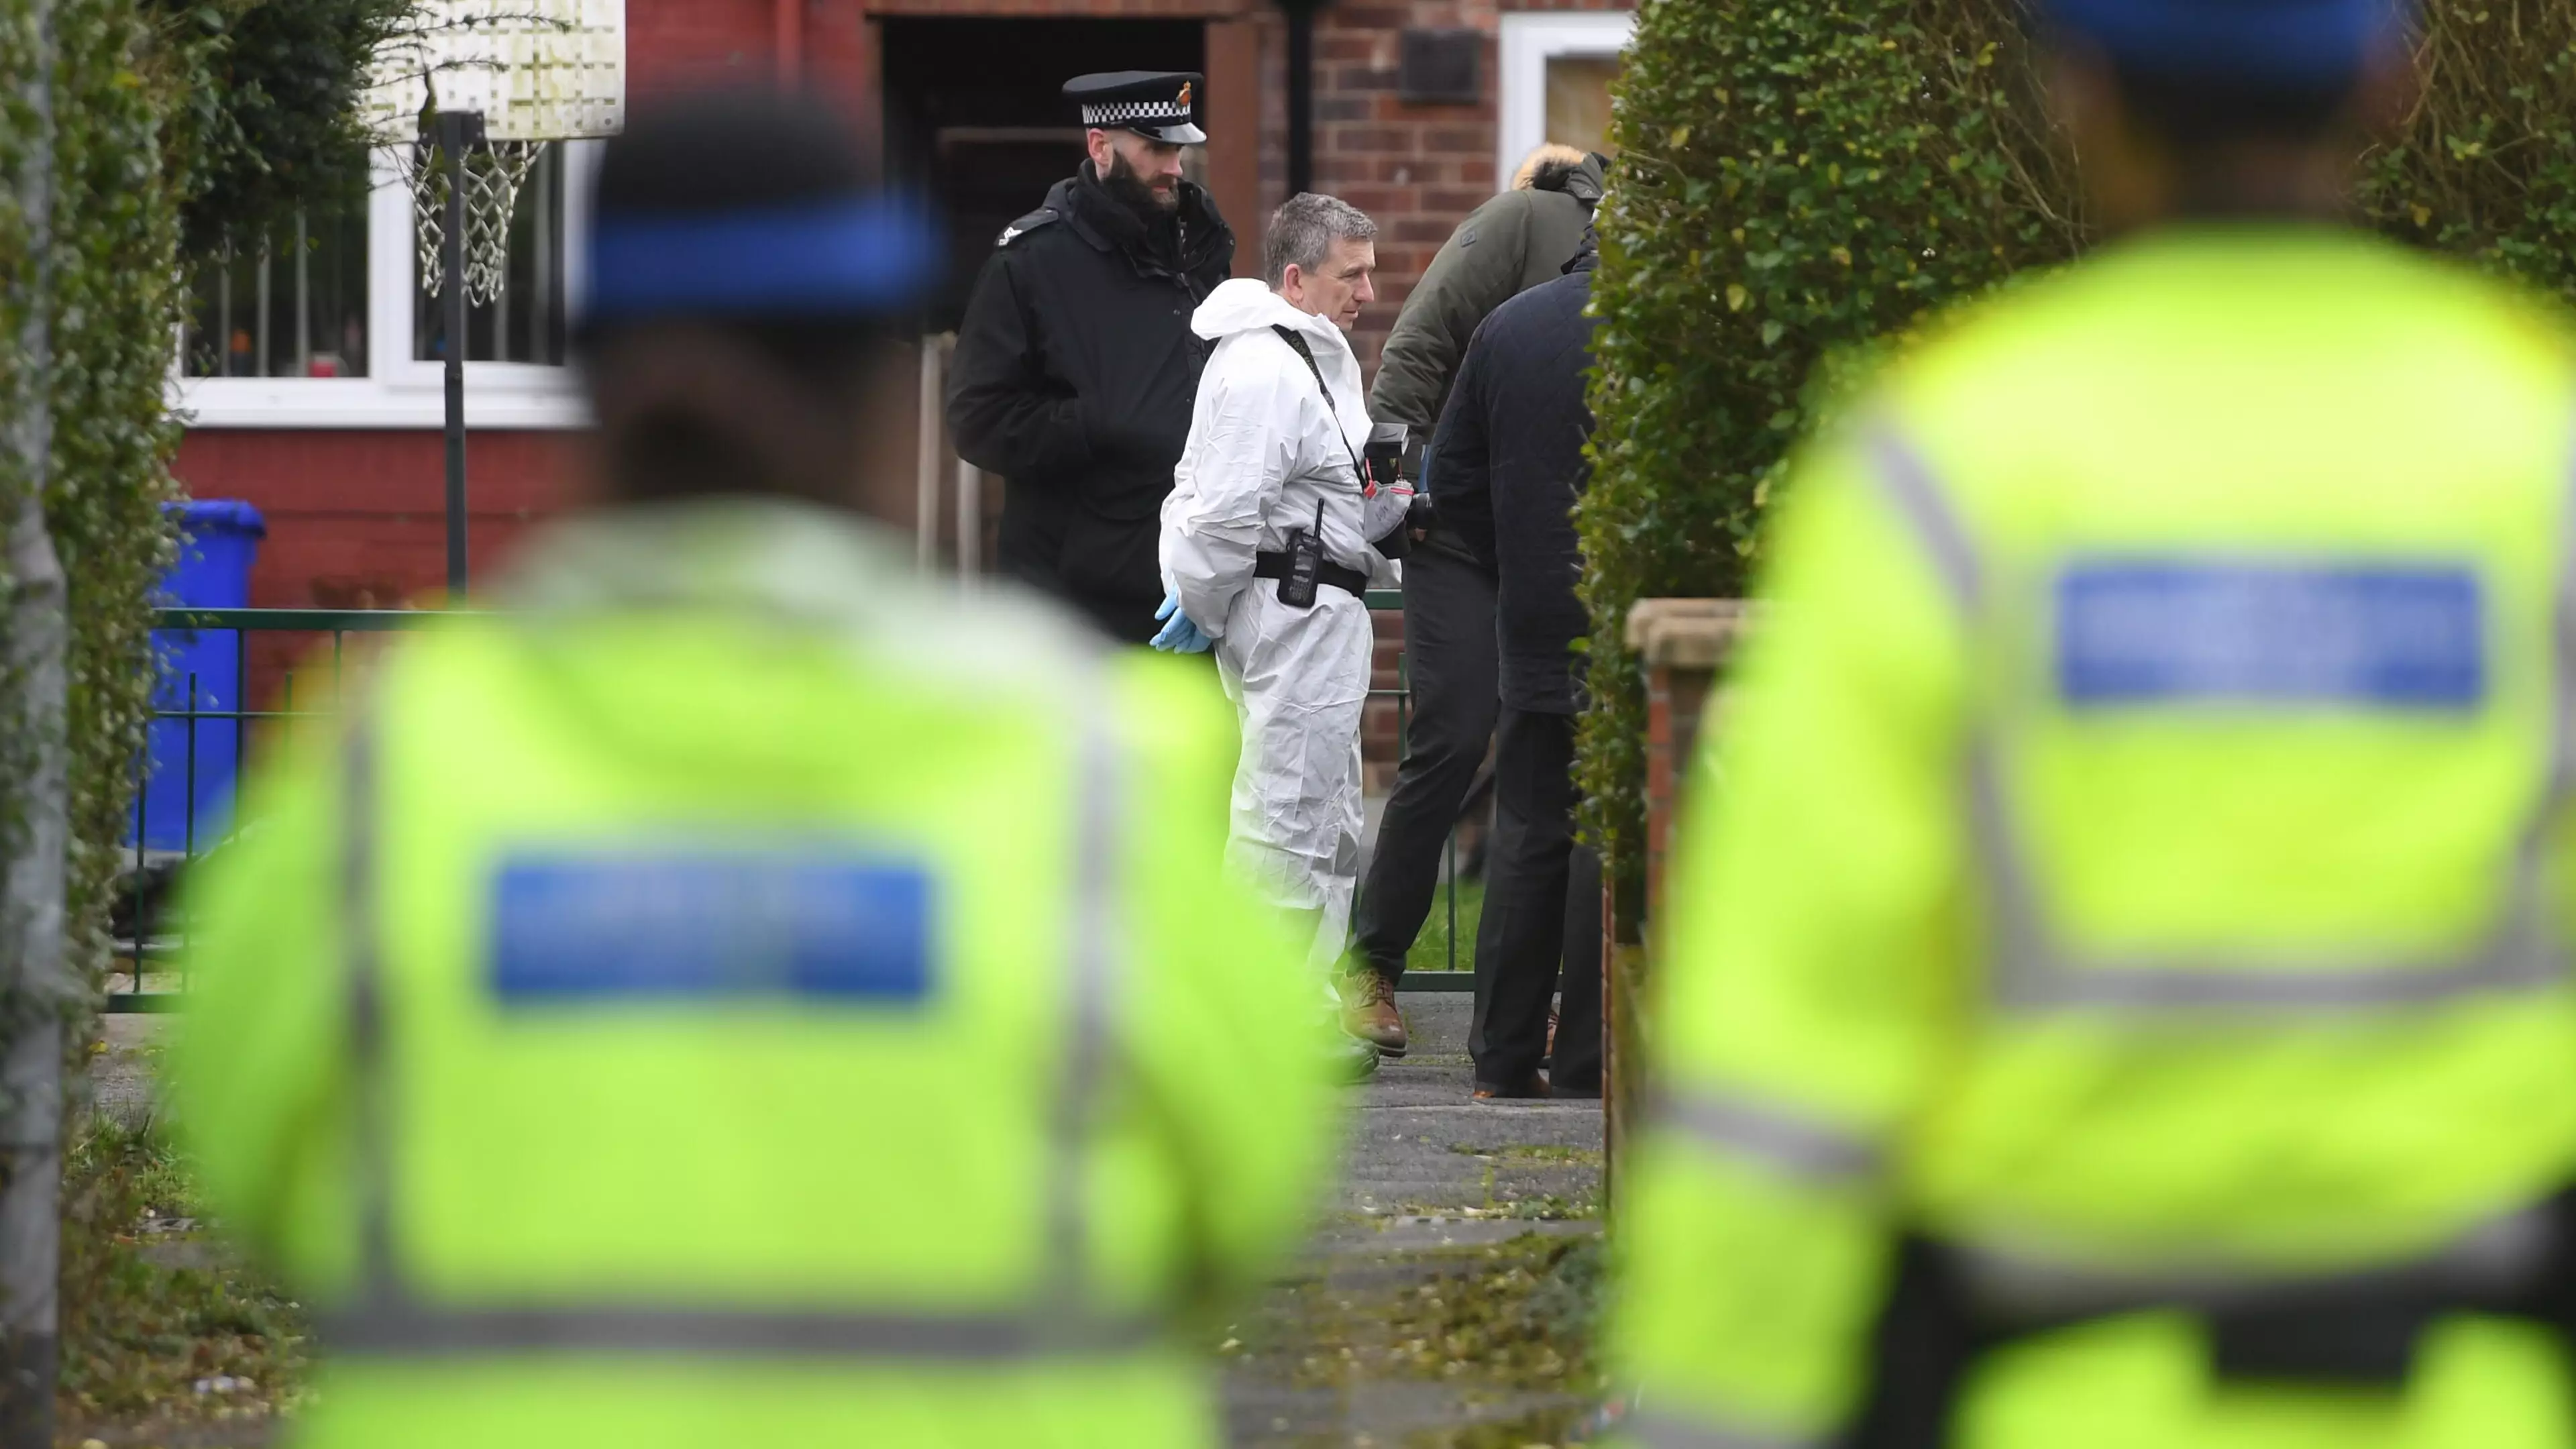 Police In Hazmat Suits Close Manchester Street After Suspected Ricin Poisoning